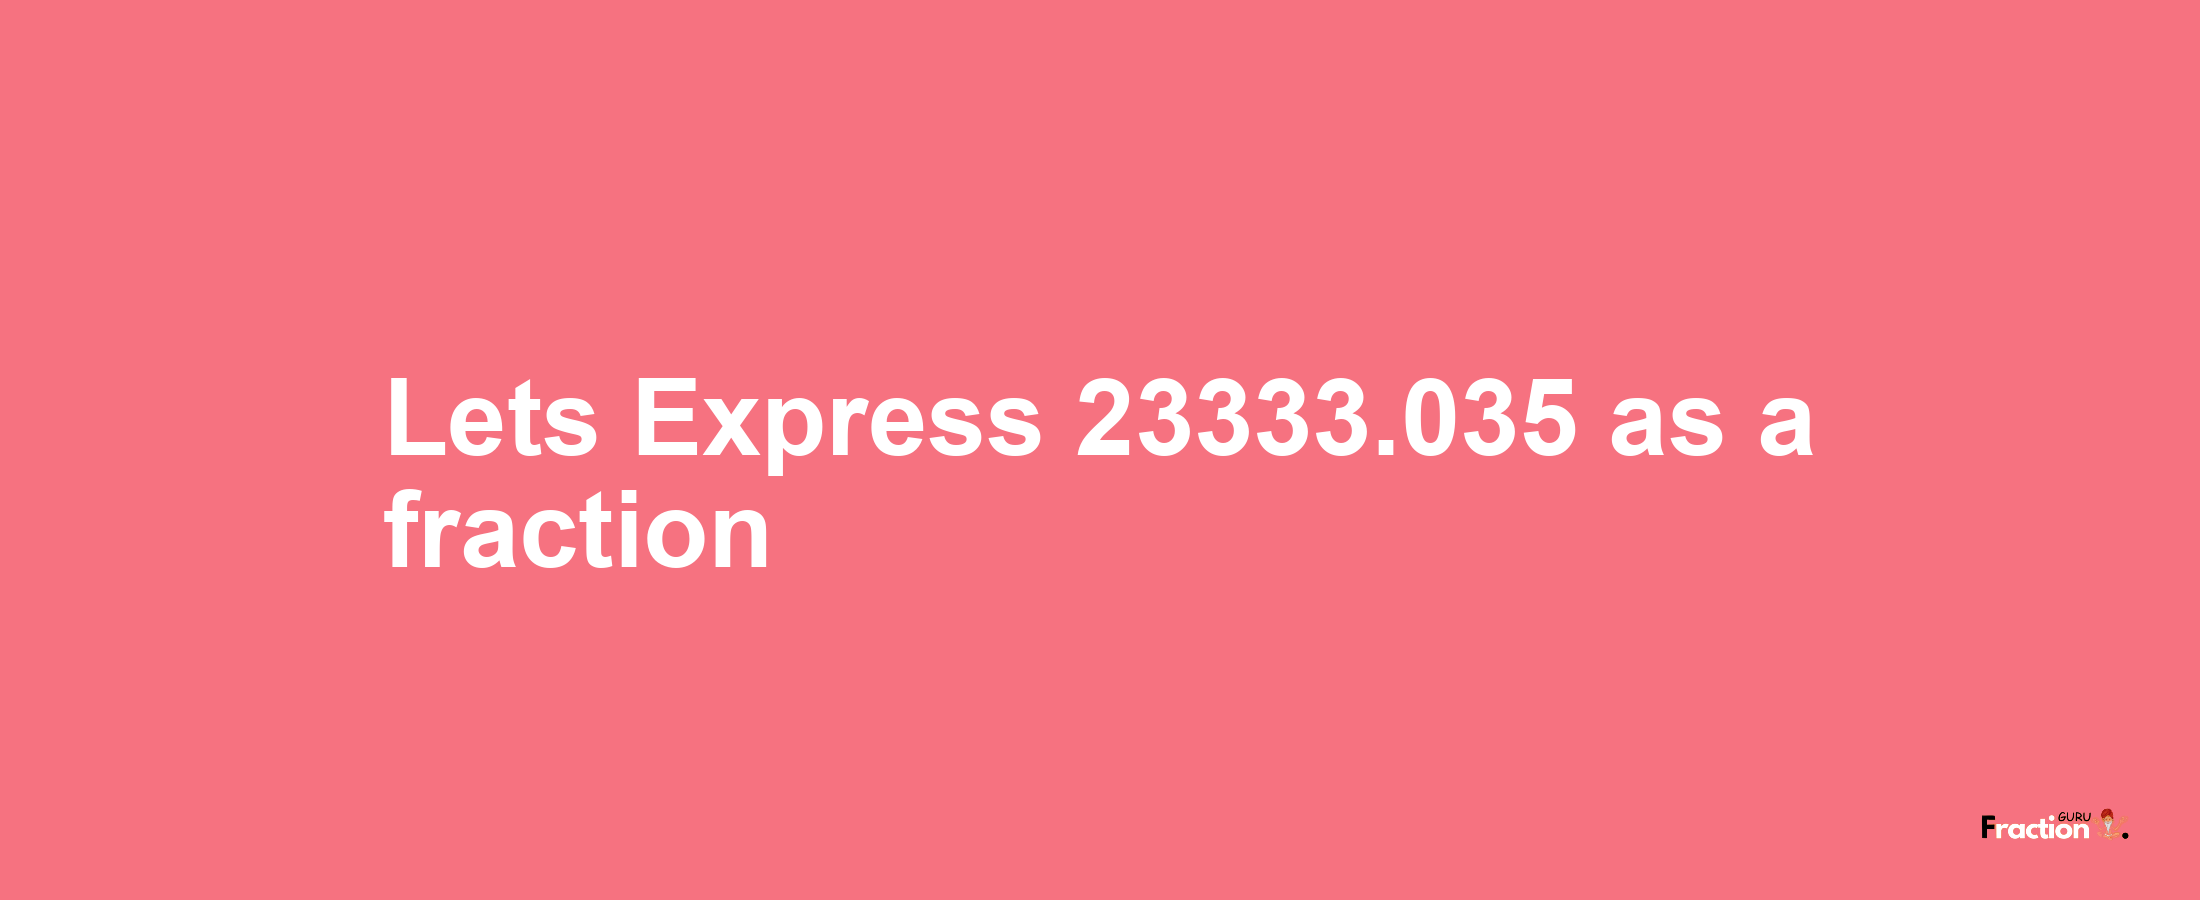 Lets Express 23333.035 as afraction